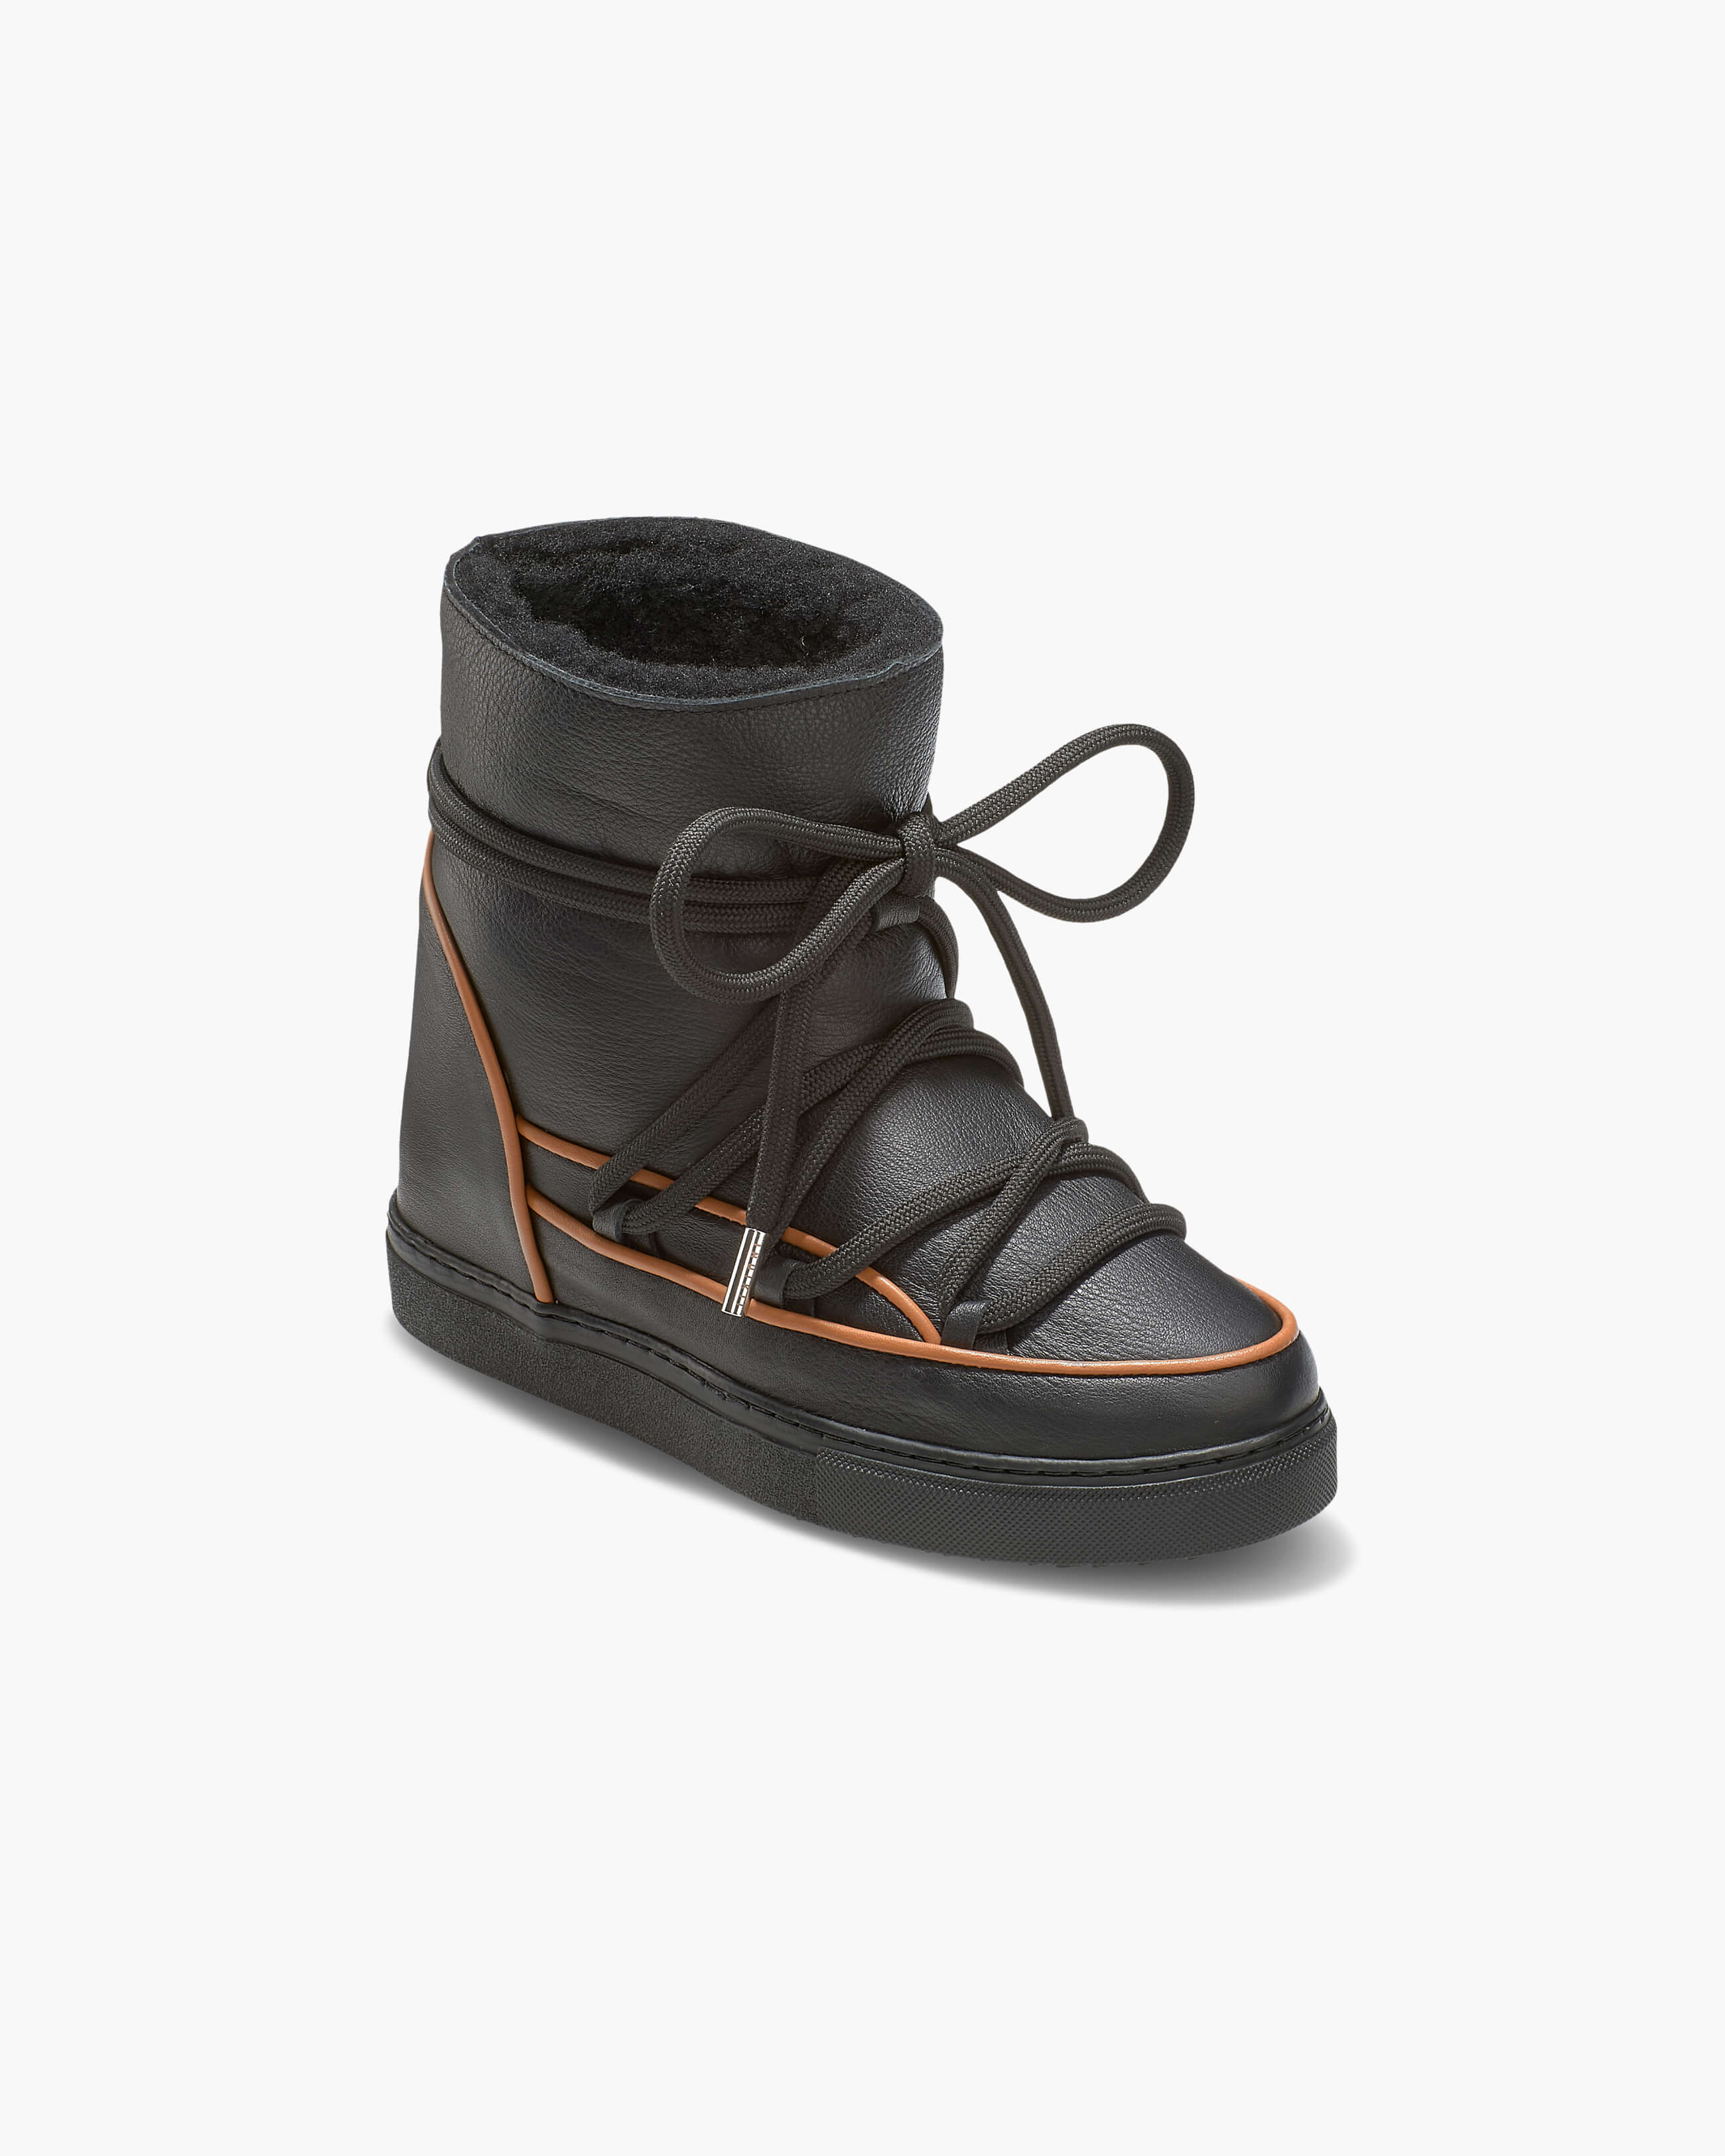 Full Leather Pastelle Wedge